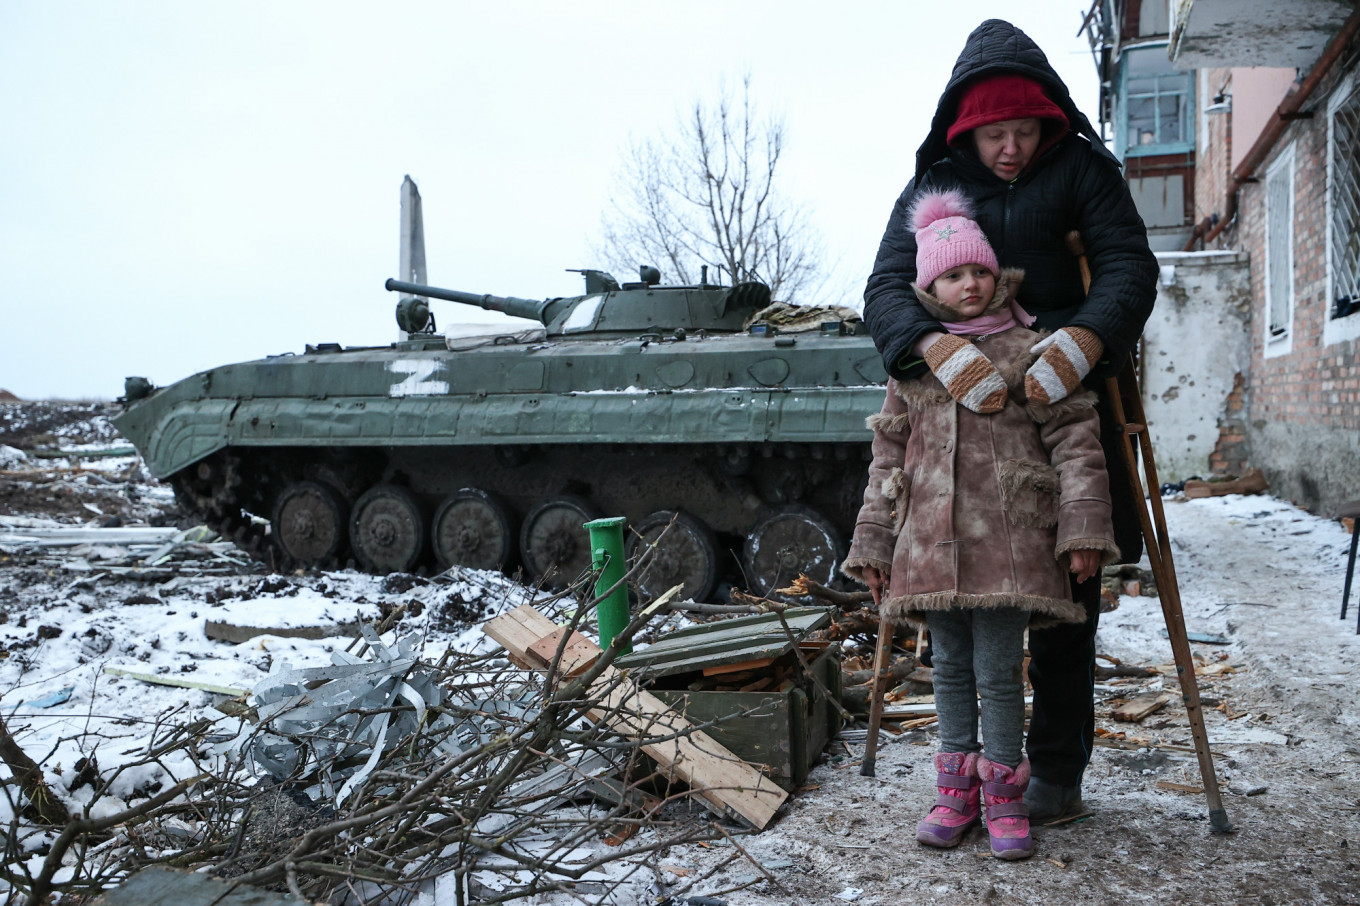 60 Feared Dead After School Bombed in East Ukraine: Governor